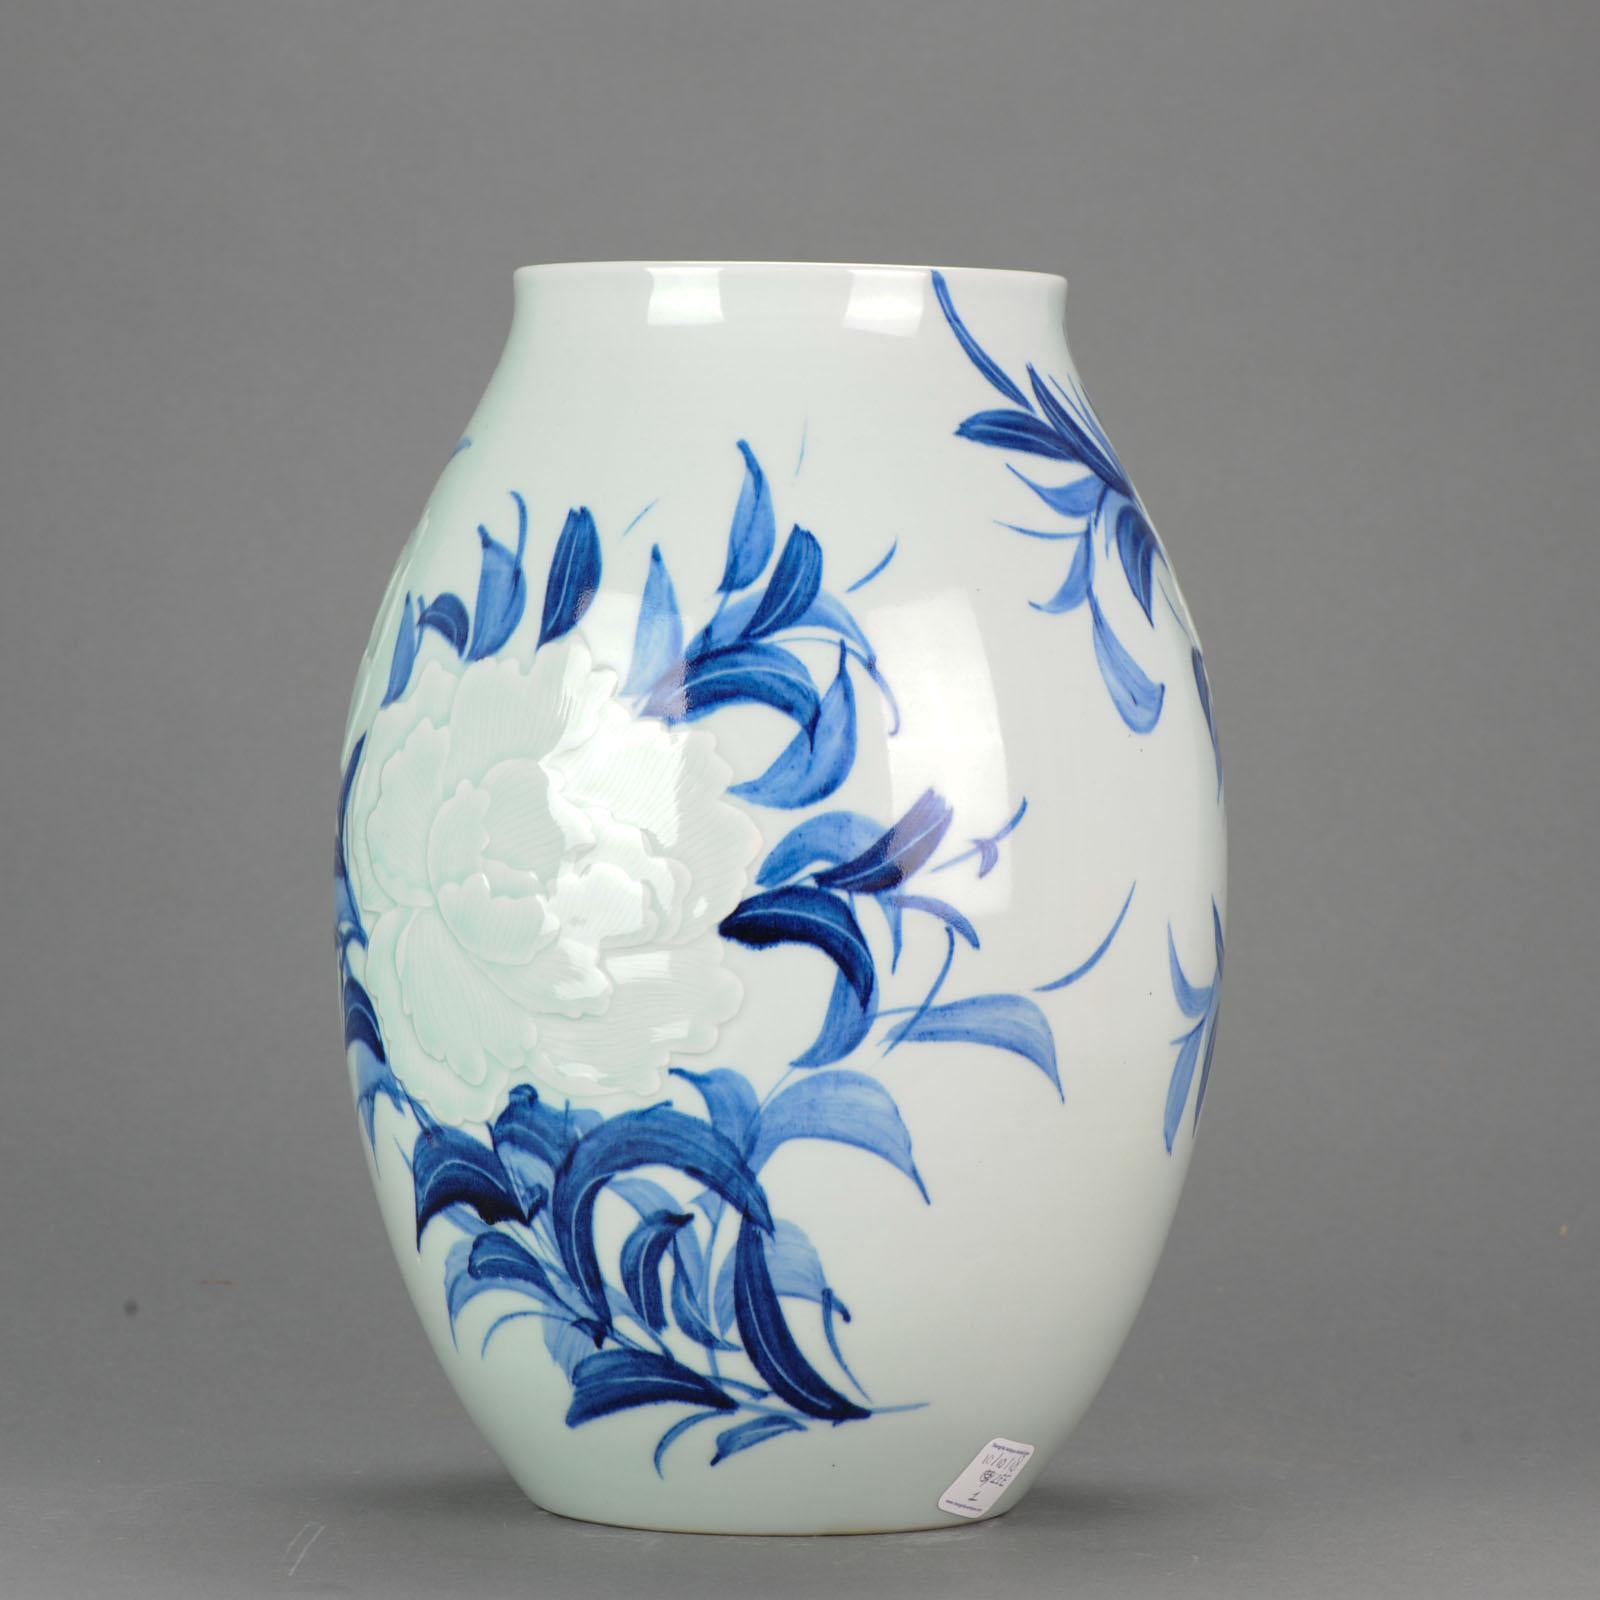 Wanglin '1972' Artist Mark Celadon Anhua Vase Dated 2001 Chinese Porcelain Vase In Excellent Condition For Sale In Amsterdam, Noord Holland